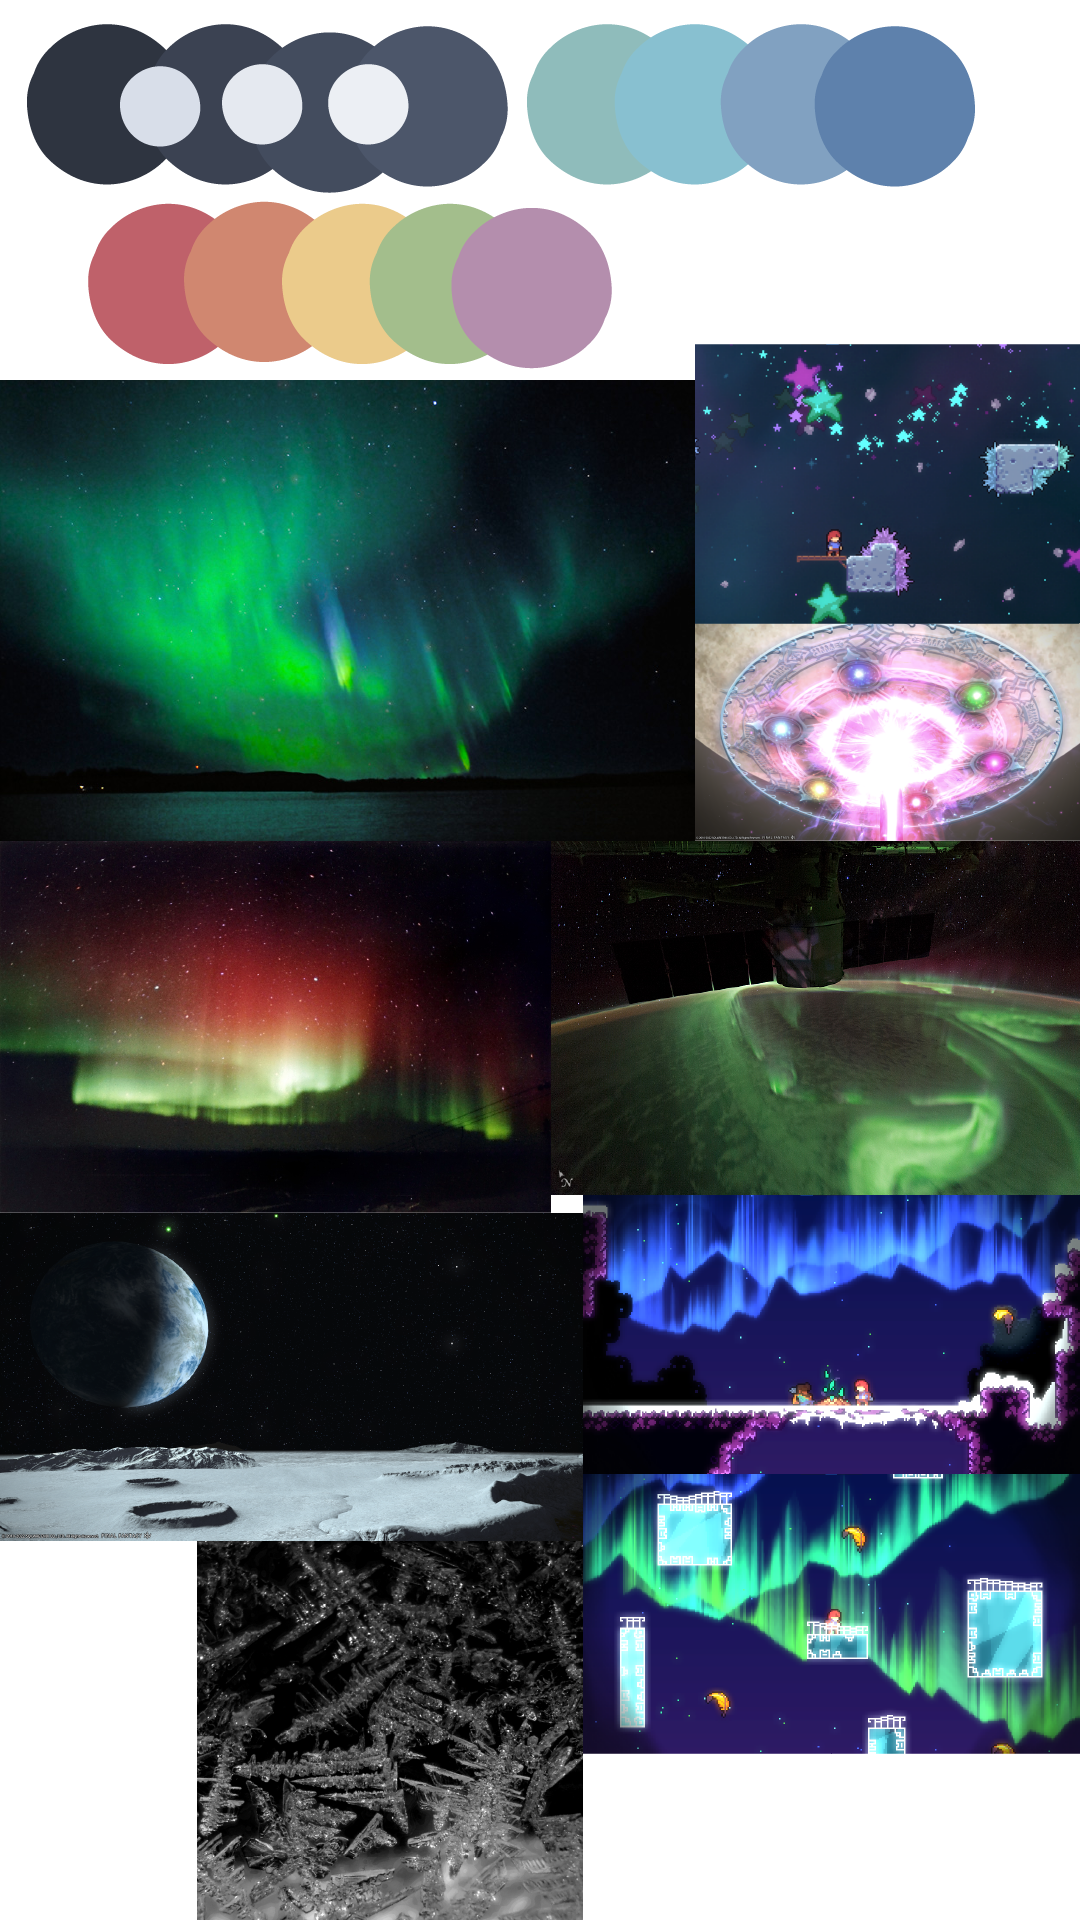 The mood-board made for moonbeam. At the top is a pastel palette, focused on the dark blue night sky as well as white and blue arctic colors. For color, pastel red, orange, yellow, green, and purple are included. Below are various images of the moon, screenshots of Celeste that feature auroras, and the Earth's northern lights viewed both from below and from space.